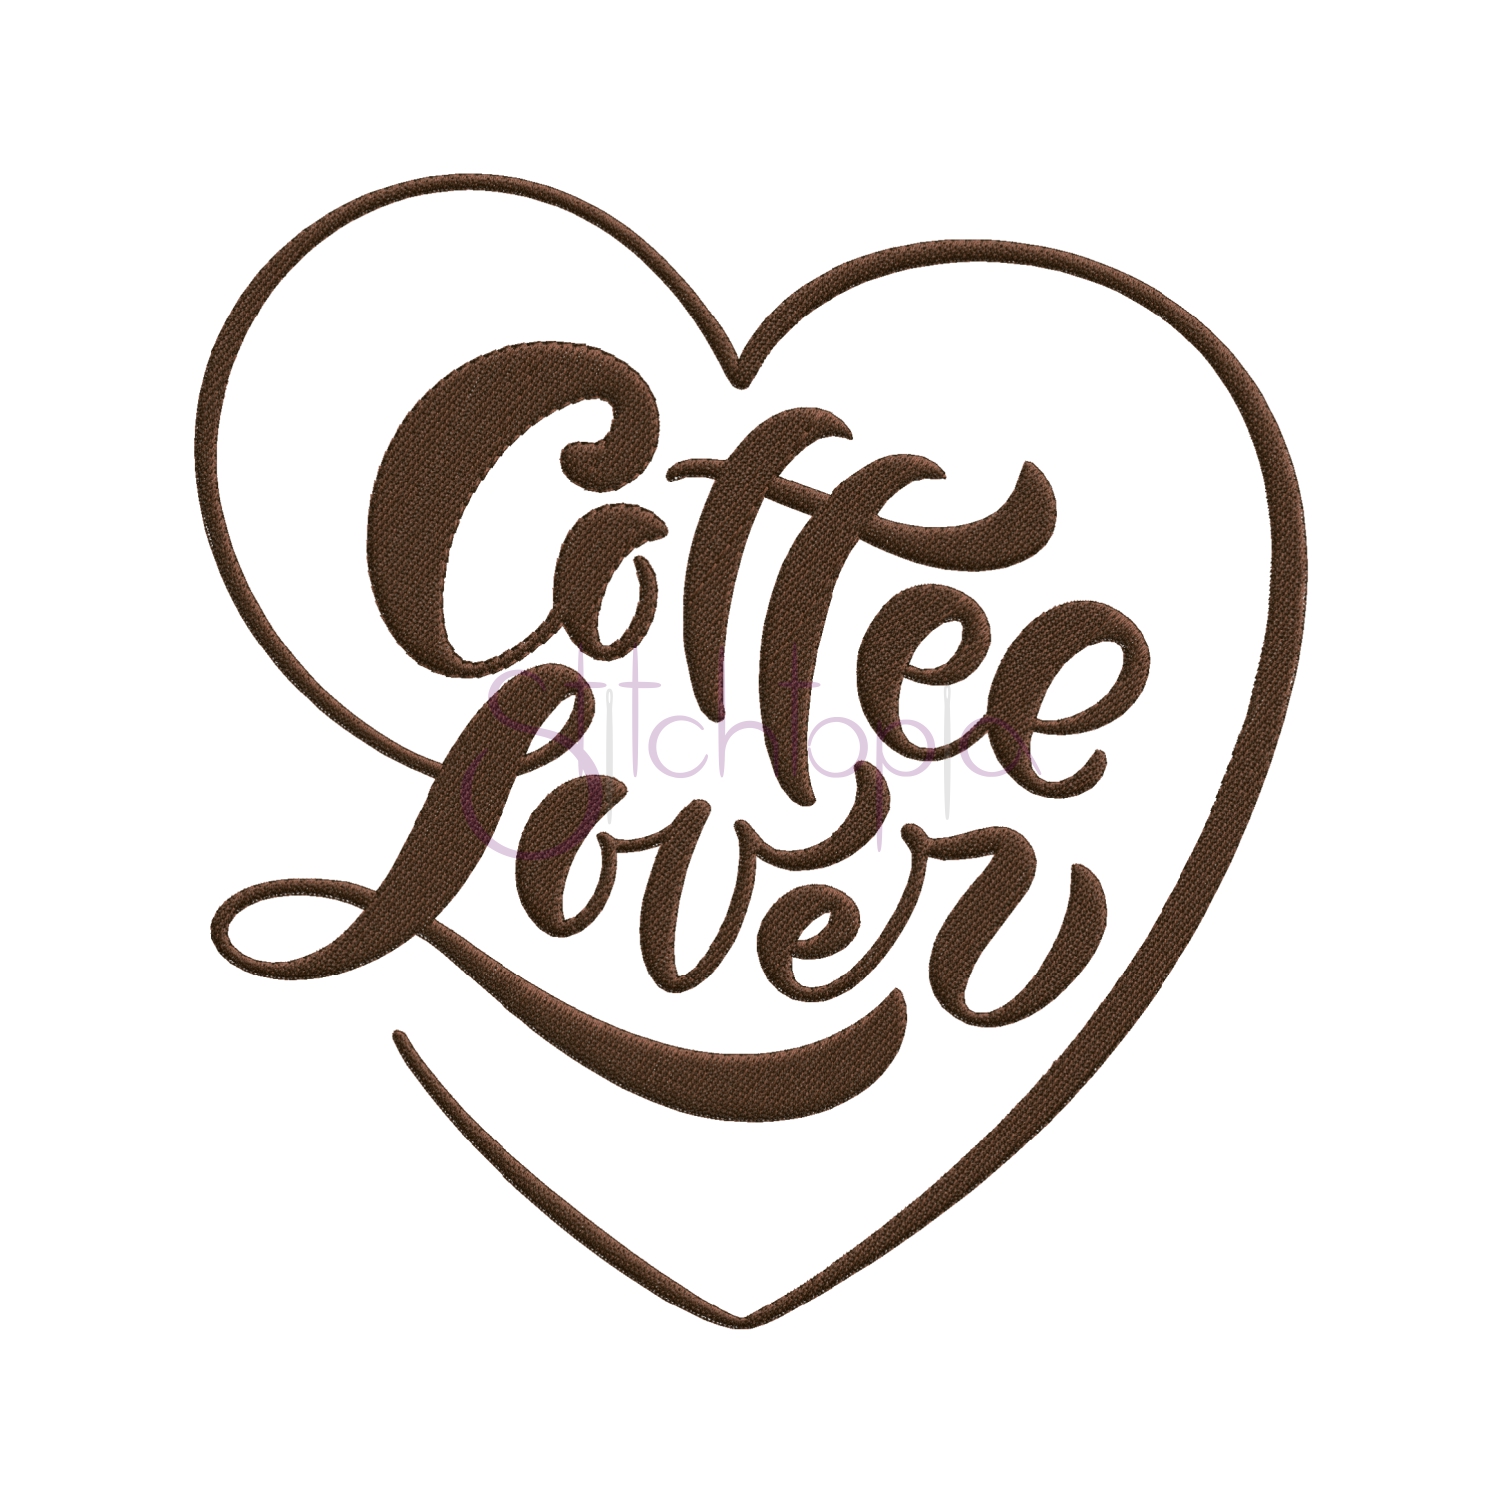 https://stitchtopia.com/wp-content/uploads/2020/09/Stitchtopia-Coffee-Lover-Embroidery-Design-Filled.jpg